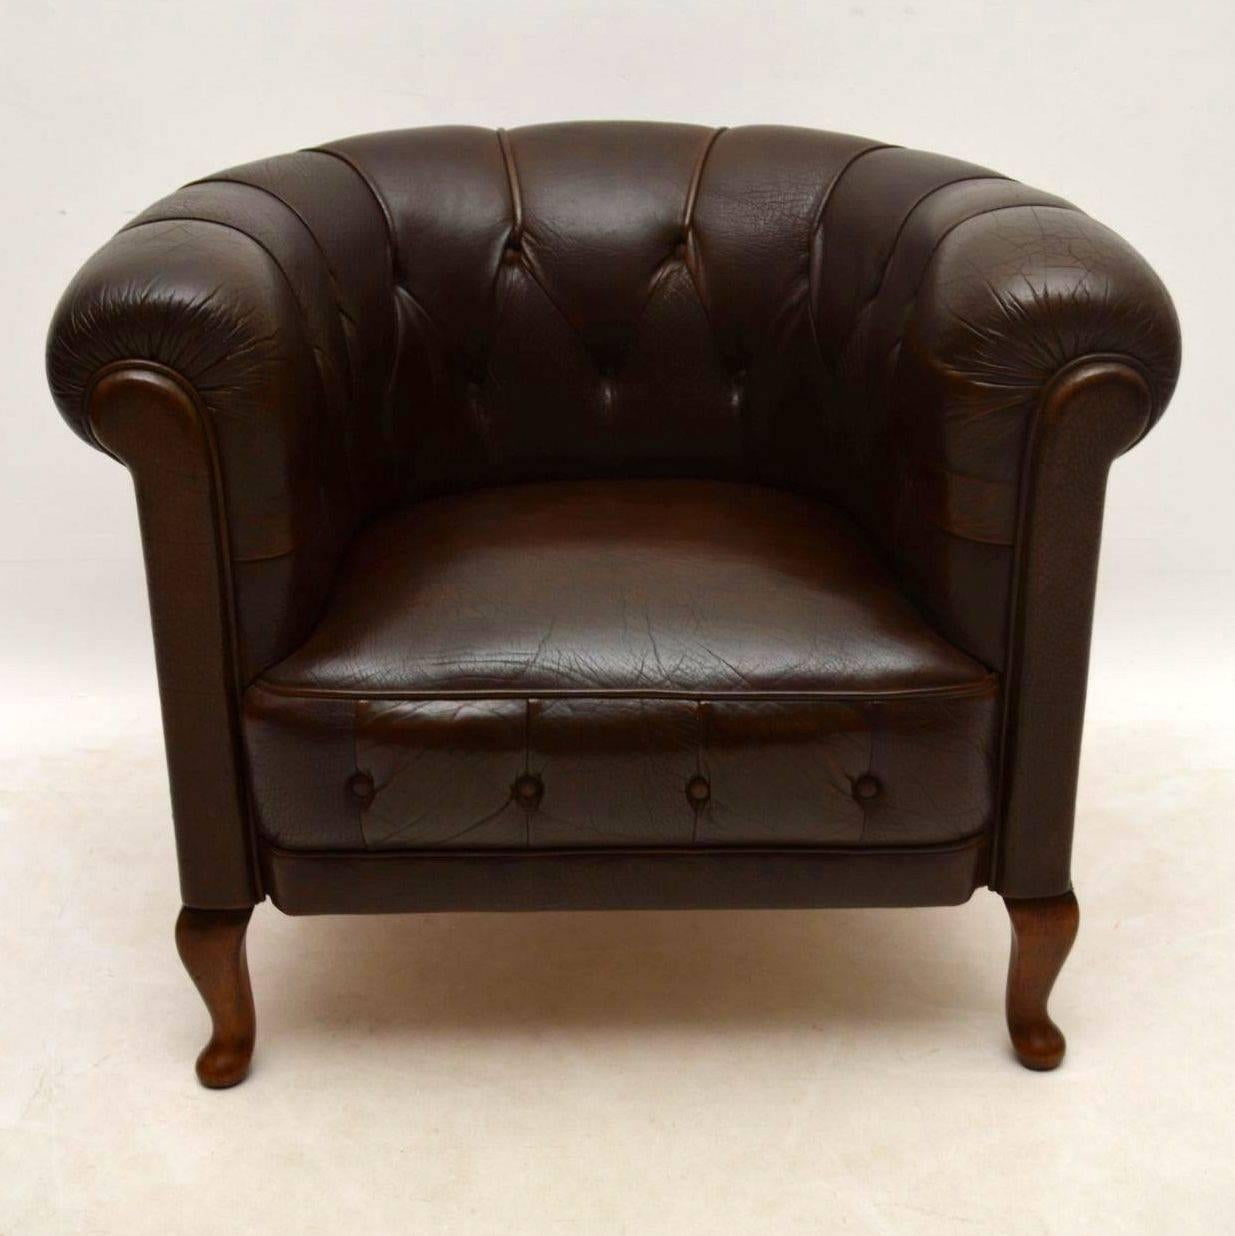 Late 19th Century Pair of Antique Swedish Leather Armchairs